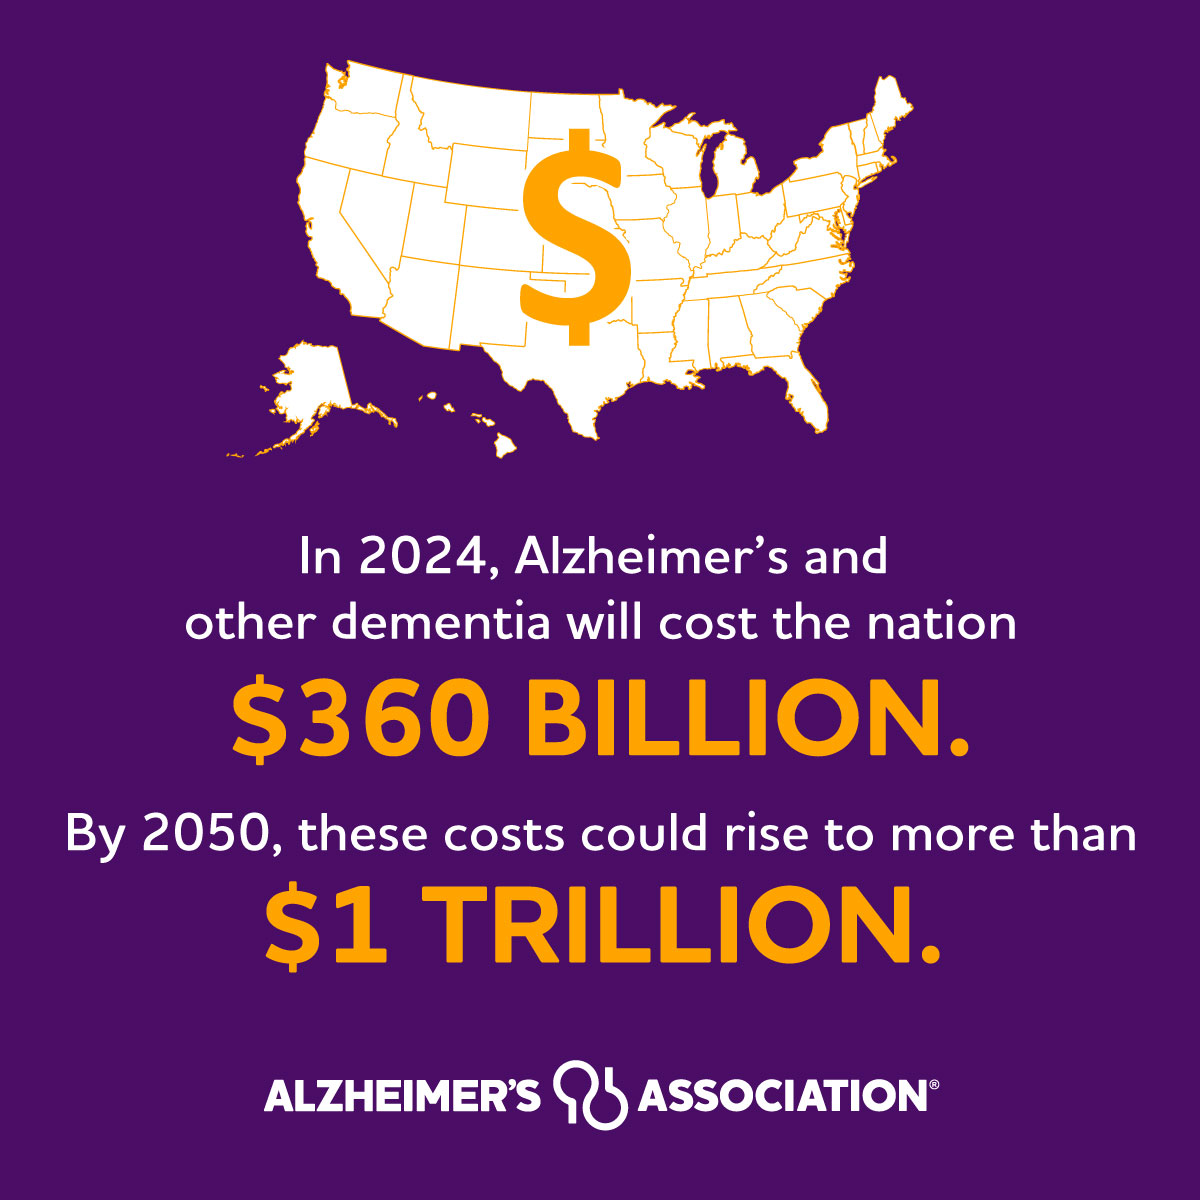 The cost for caring for individuals with Alzheimer’s and other dementia is a burden on our economy. And by 2050, costs could rise to just under $1 trillion. Share the facts: alz.org/facts. #ENDALZ